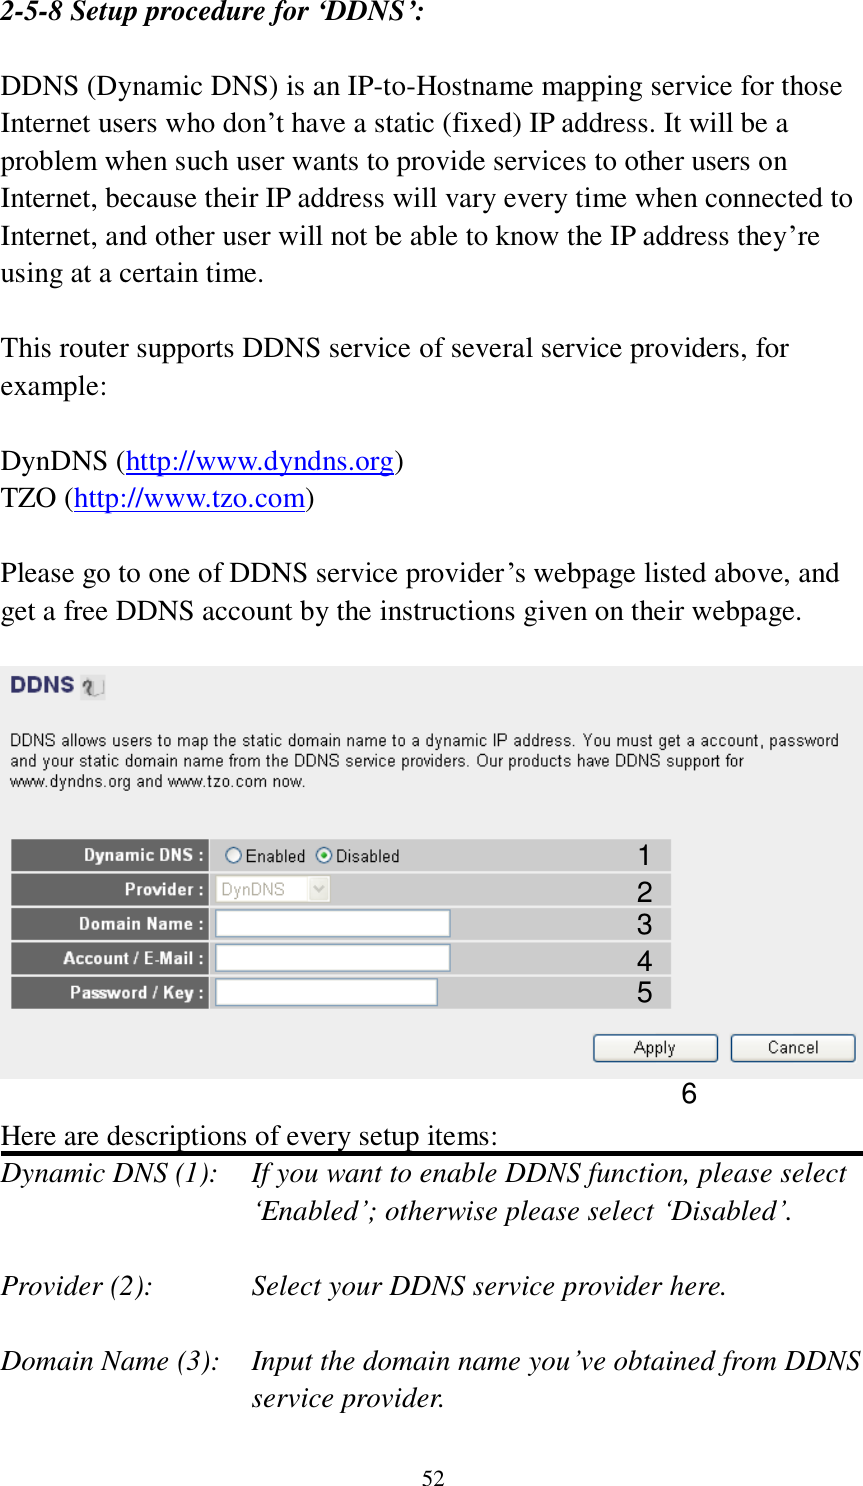 52 2-5-8 Setup procedure for ‘DDNS’:  DDNS (Dynamic DNS) is an IP-to-Hostname mapping service for those Internet users who don‟t have a static (fixed) IP address. It will be a problem when such user wants to provide services to other users on Internet, because their IP address will vary every time when connected to Internet, and other user will not be able to know the IP address they‟re using at a certain time.  This router supports DDNS service of several service providers, for example:  DynDNS (http://www.dyndns.org) TZO (http://www.tzo.com)  Please go to one of DDNS service provider‟s webpage listed above, and get a free DDNS account by the instructions given on their webpage.    Here are descriptions of every setup items: Dynamic DNS (1):    If you want to enable DDNS function, please select „Enabled‟; otherwise please select „Disabled‟.  Provider (2):      Select your DDNS service provider here.  Domain Name (3):    Input the domain name you‟ve obtained from DDNS service provider. 1 2 3 4 5 6 